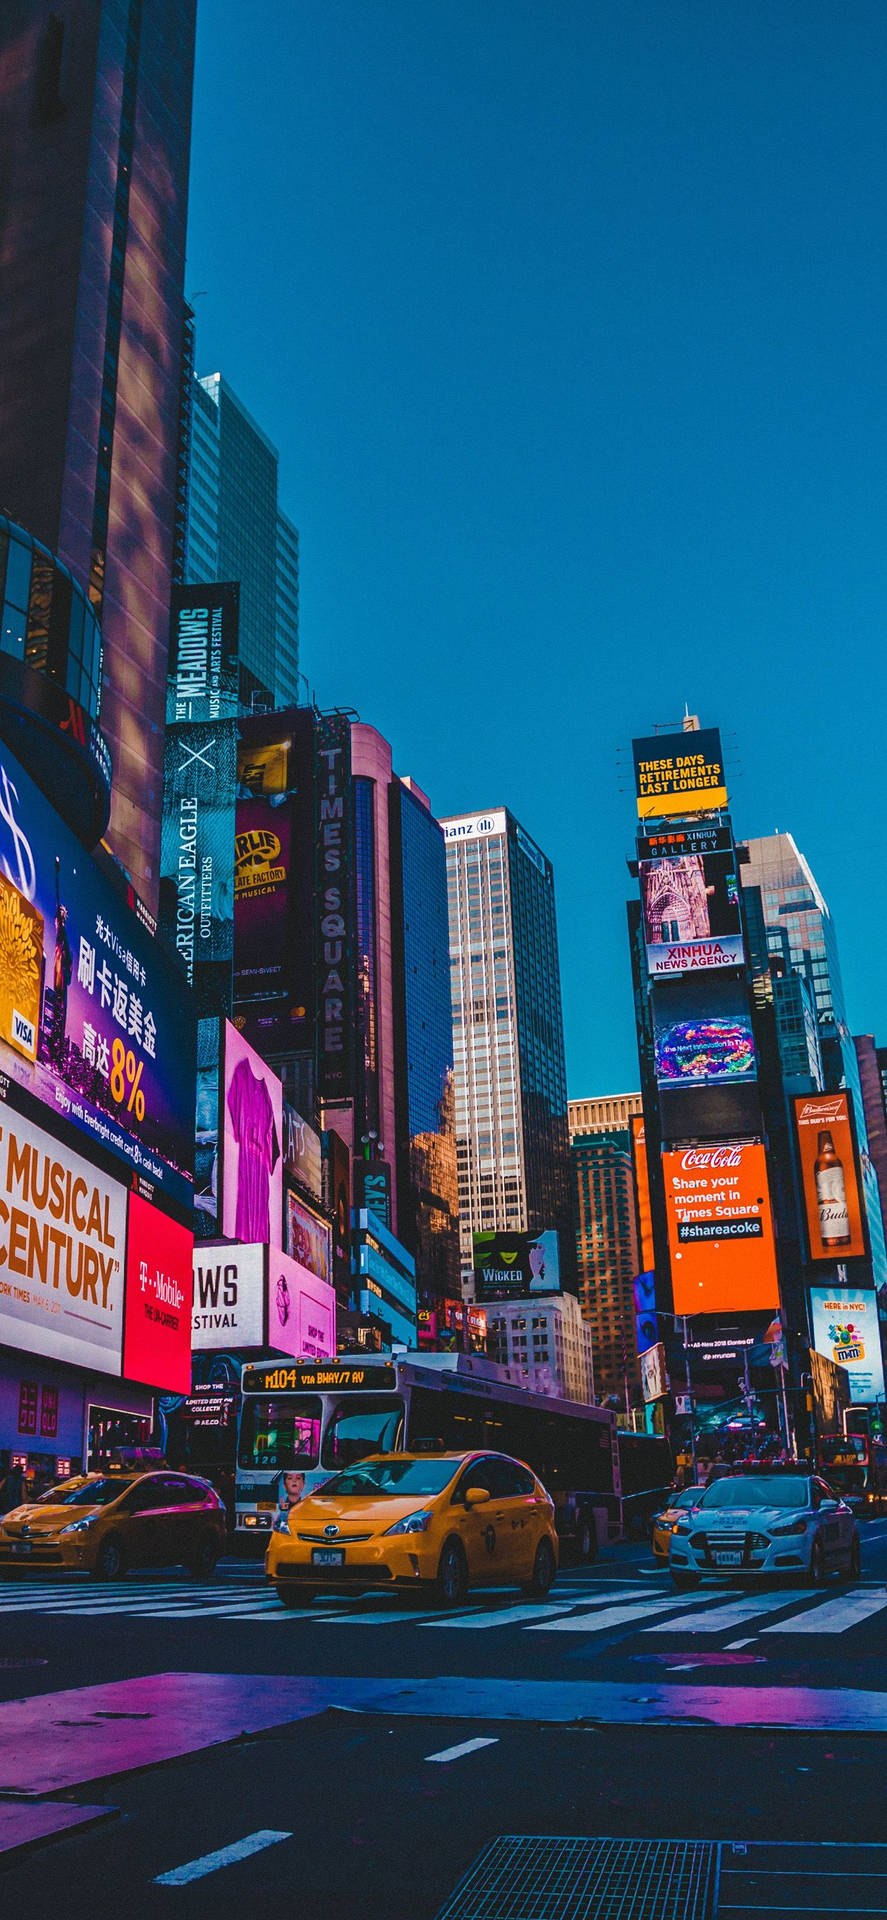 Times Square Billboards New York Night iPhone Wallpaper